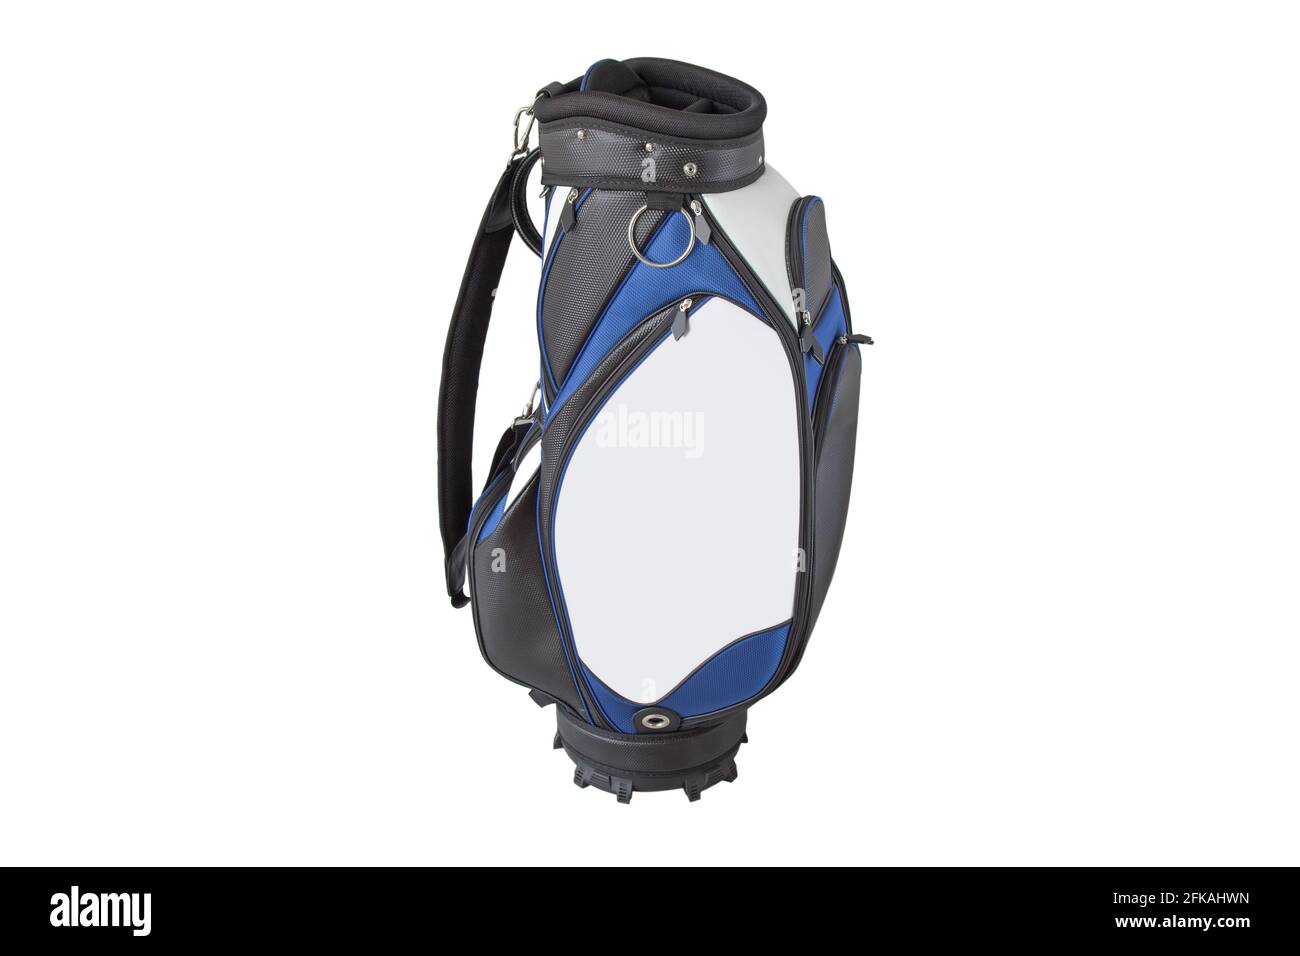 Front view of a multiple pockets golf bag in blue white black with quick release shoulder straps isolated on white background Stock Photo